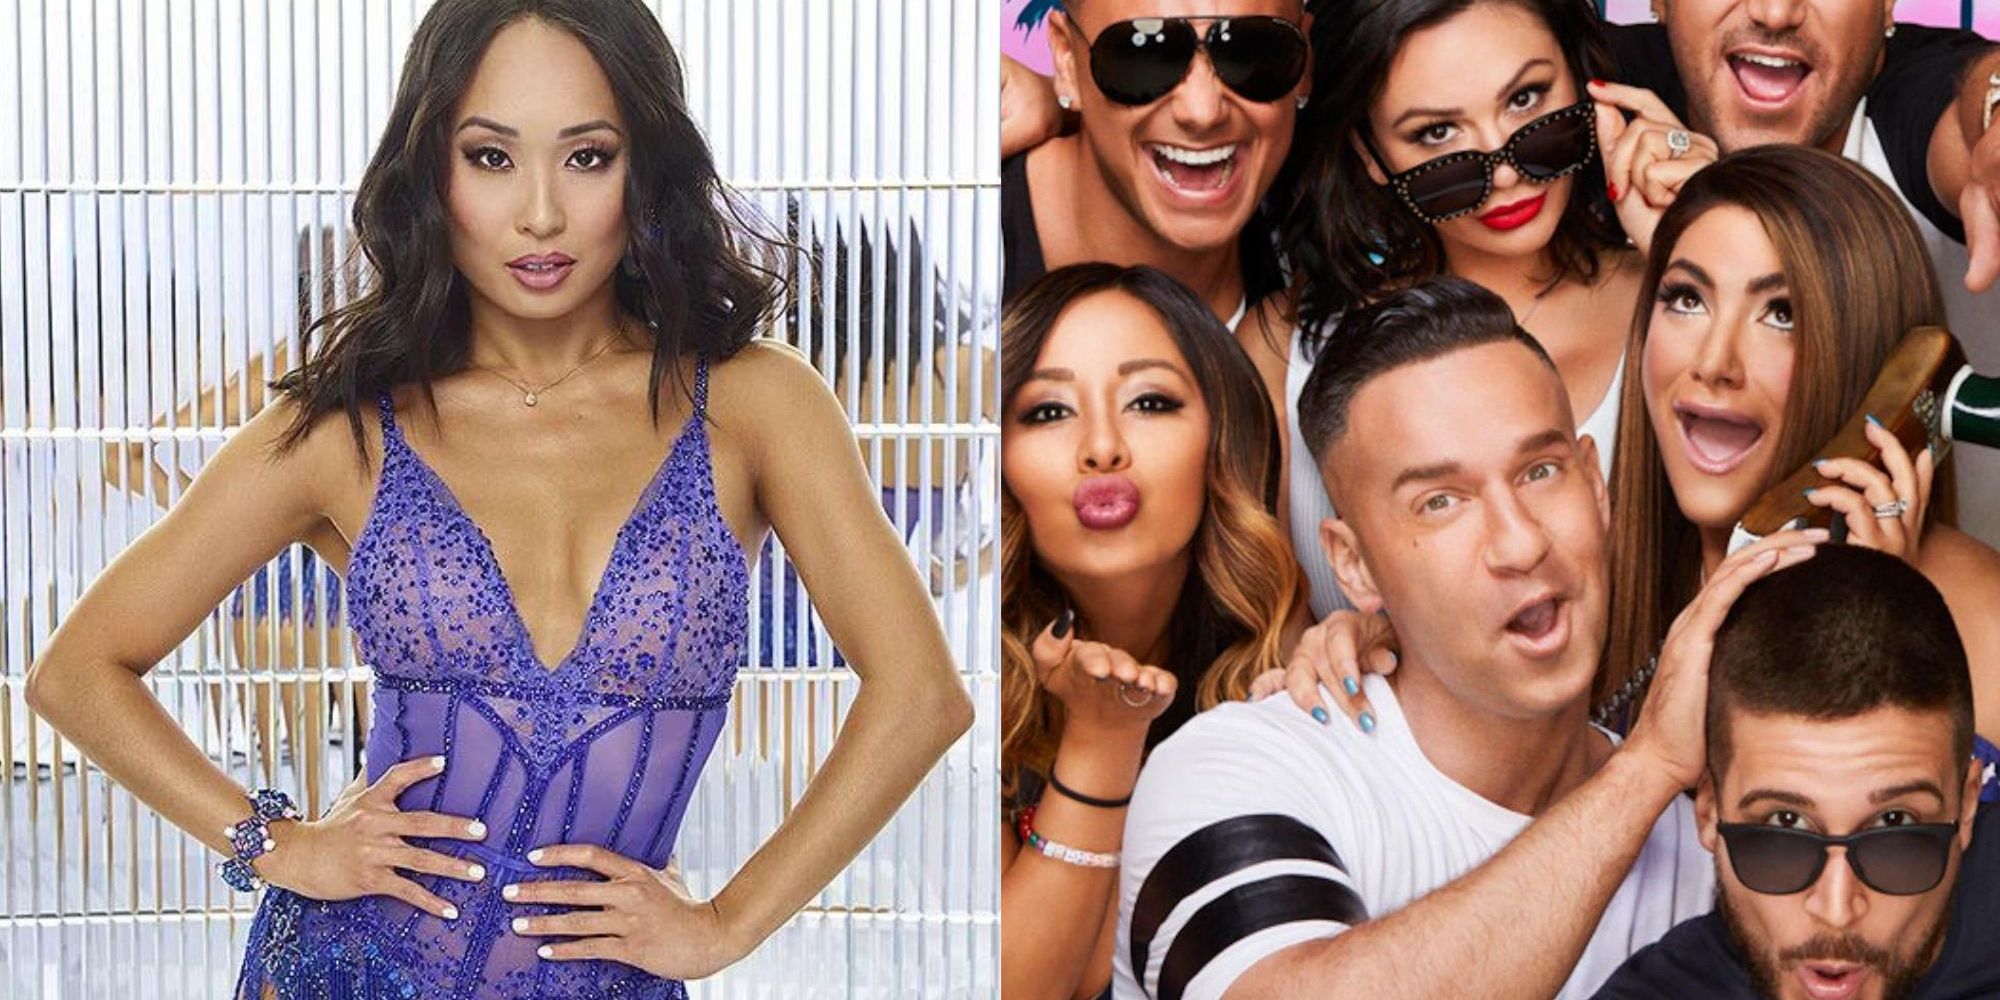 DWTS: Koko Iwasaki Reveals She Fist Pumped With Jersey Shore Cast